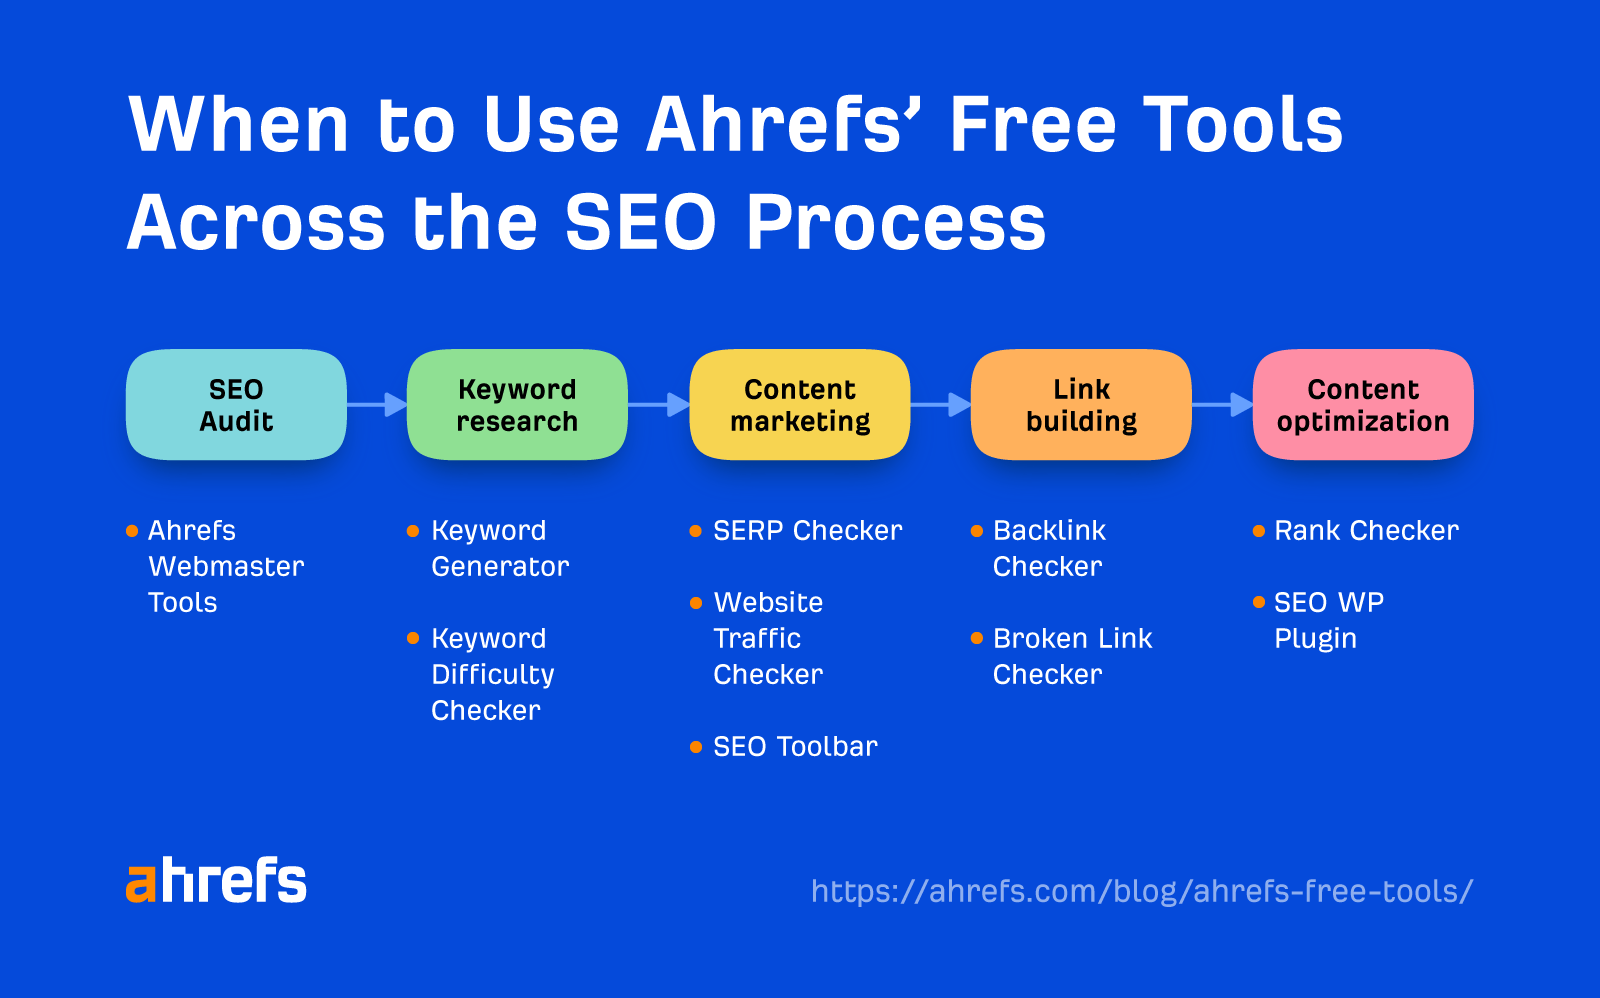 When to use Ahrefs' free tool across the SEO process